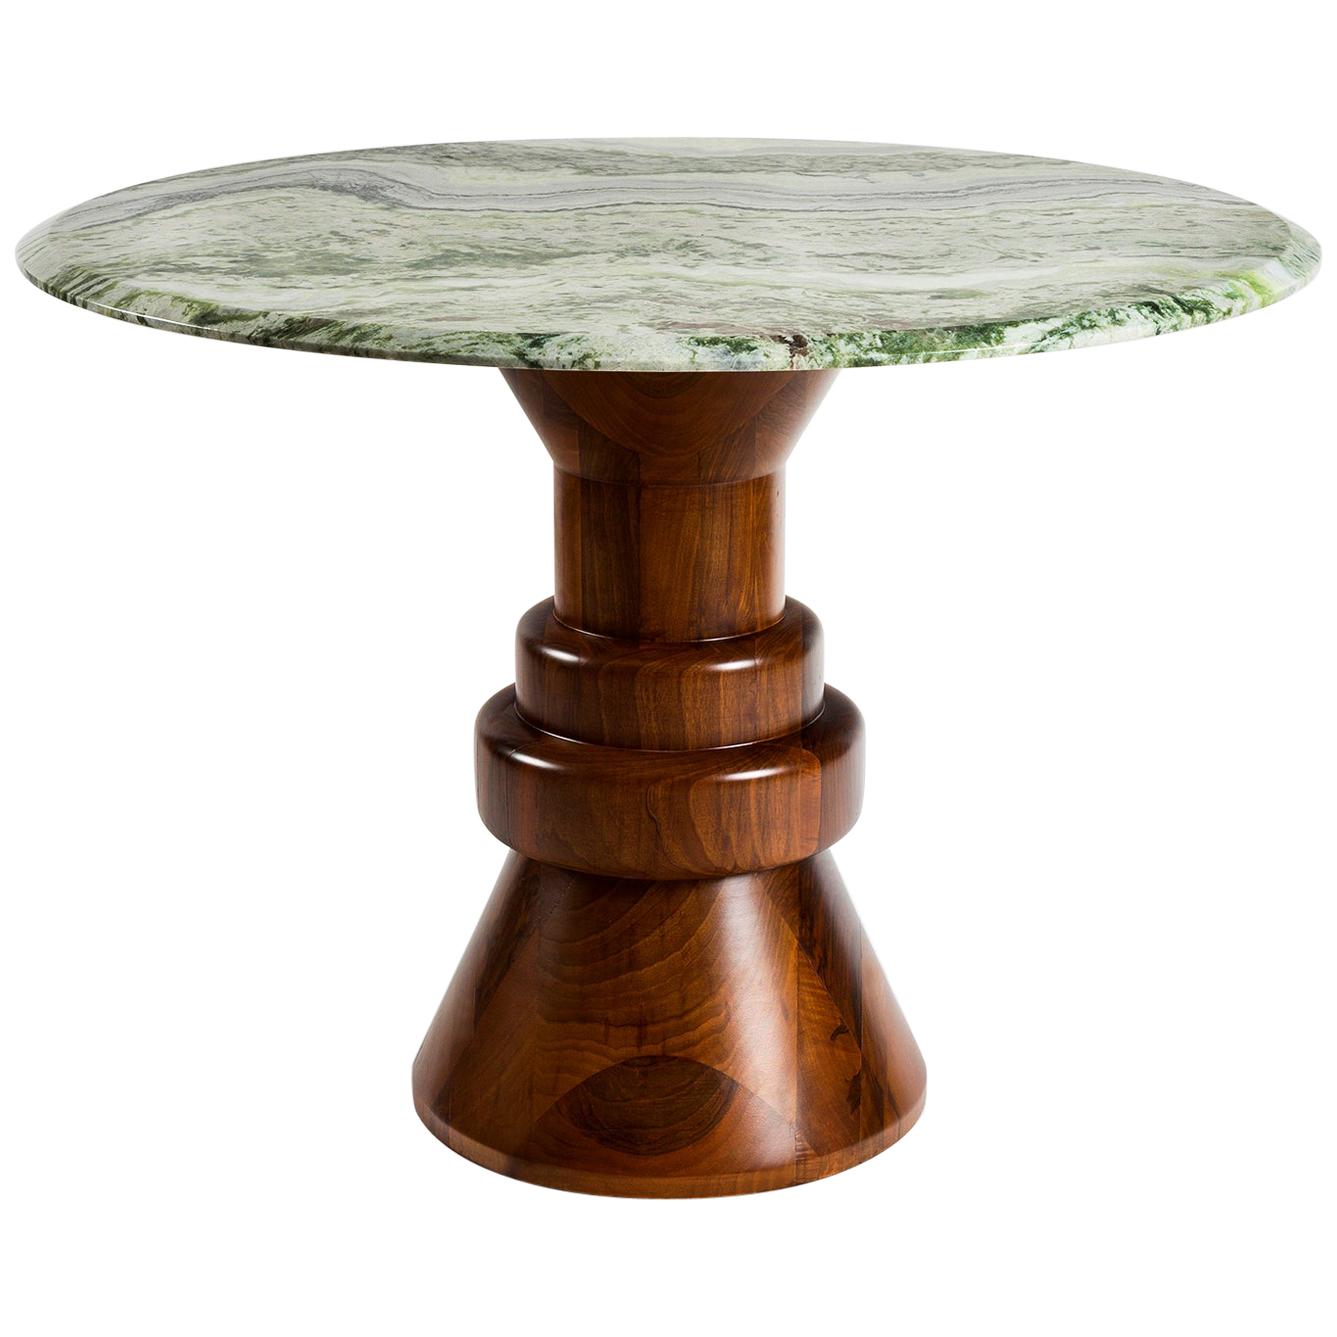 21st Century Green Marble Round Dining Table with Sculptural Wooden Base For Sale